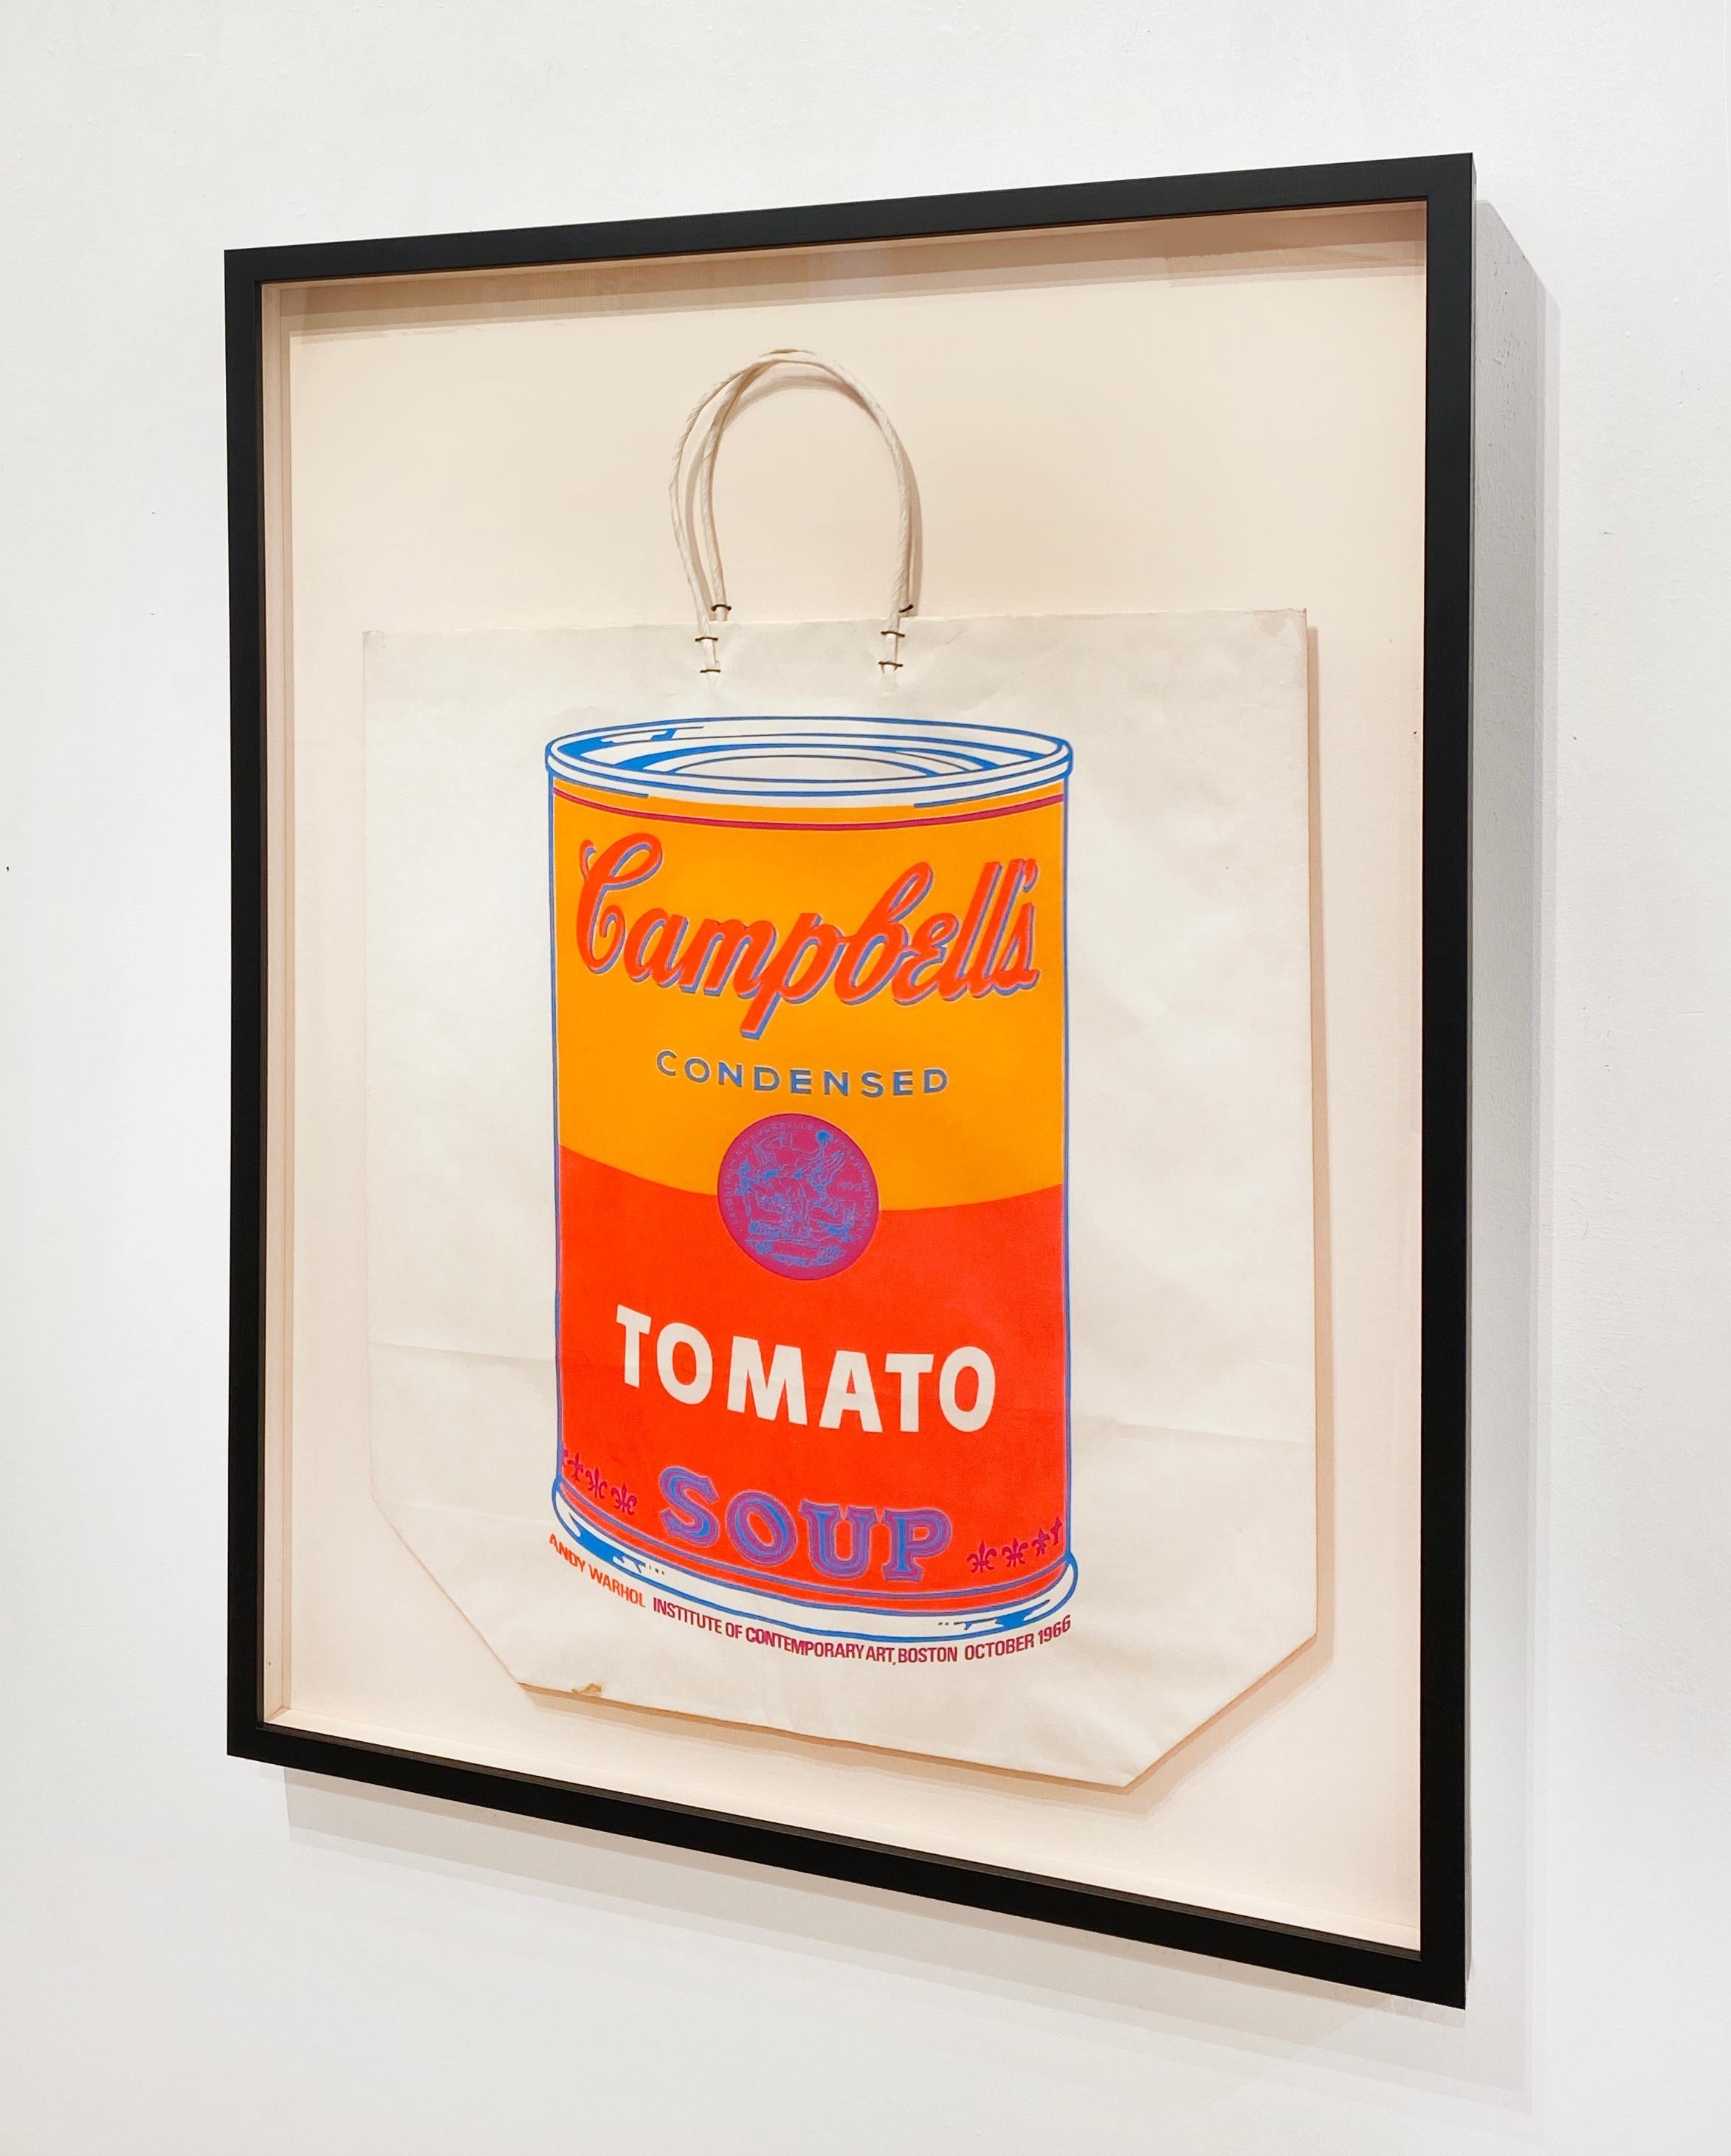 Artist:  Warhol, Andy
Title:  Campbell's Soup Can on Shopping Bag
Date:  1966
Medium:  Color Screenprint on Shopping Bag
Unframed Dimensions:  19